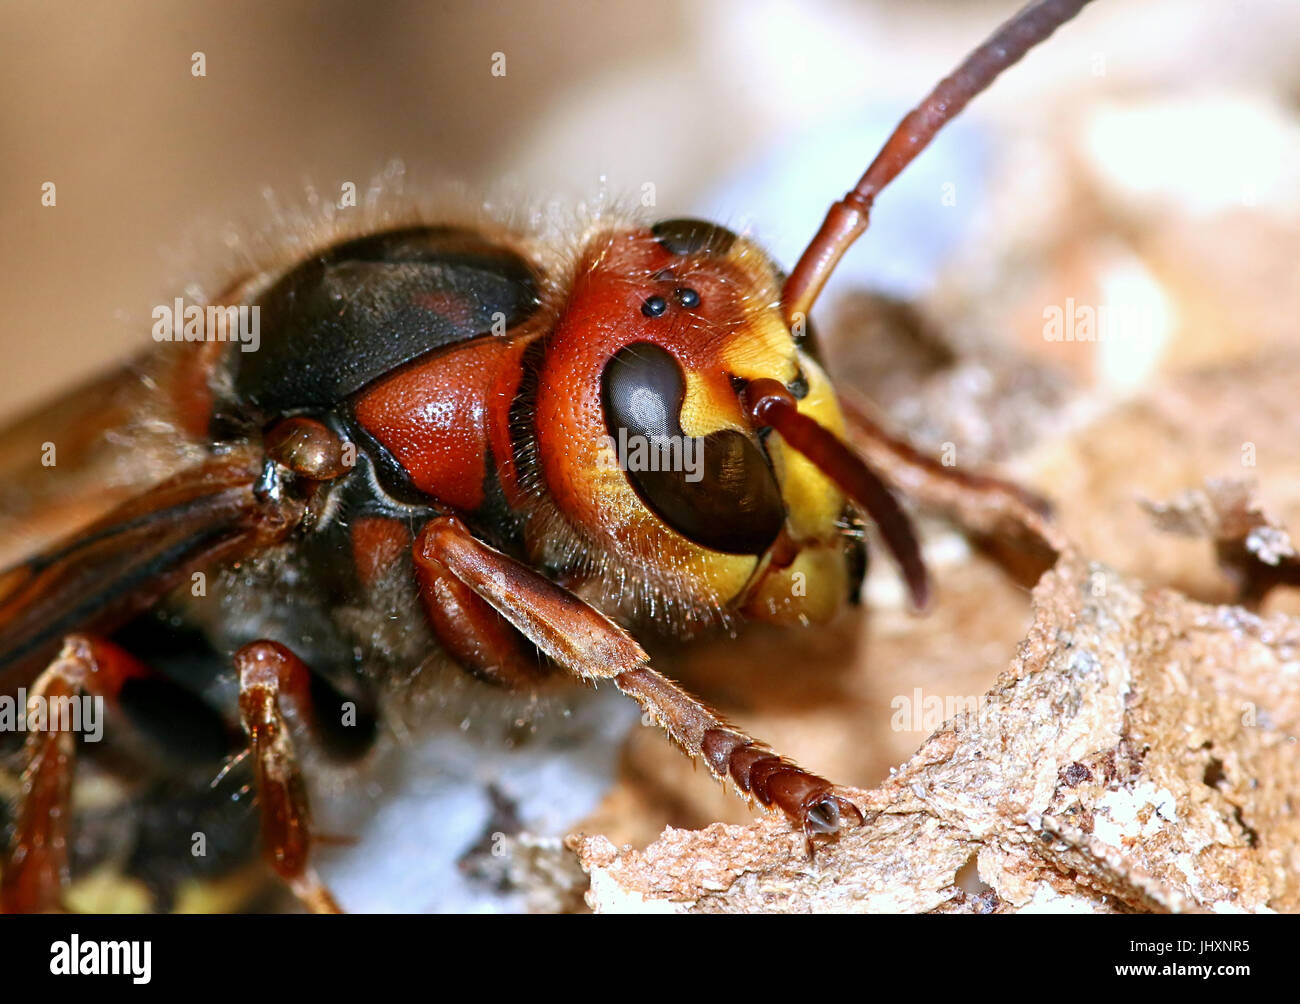 Extreme close up of the head of a European hornet worker (Vespa crabro) busy constructing a nest. Stock Photo